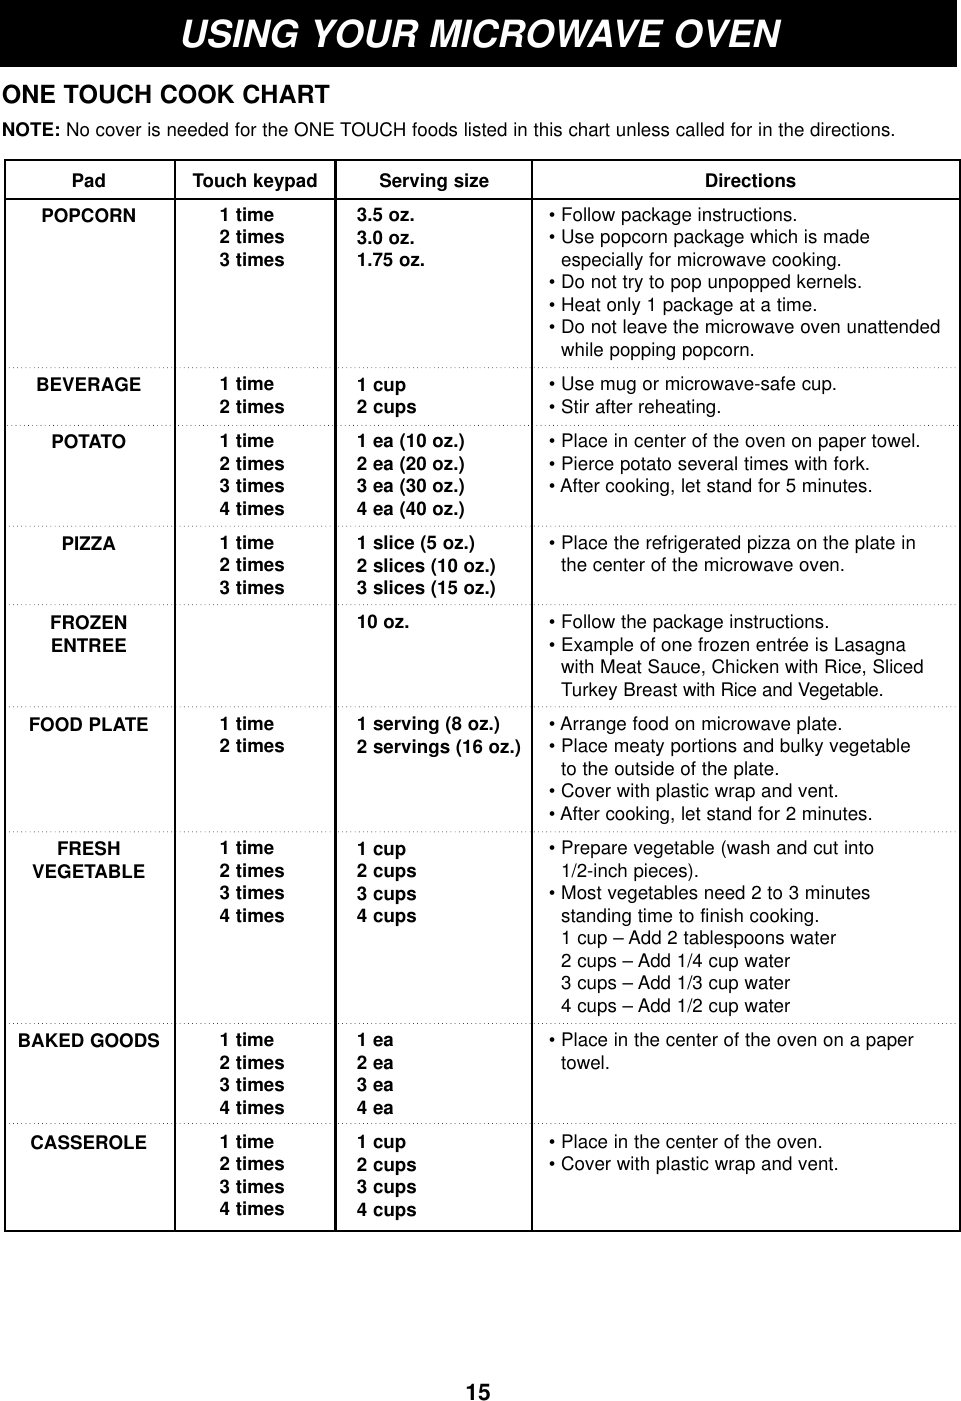 15USING YOUR MICROWAVE OVENONE TOUCH COOK CHARTNOTE: No cover is needed for the ONE TOUCH foods listed in this chart unless called for in the directions.PadPOPCORNBEVERAGEPOTATOPIZZAFROZENENTREEFOOD PLATEFRESH VEGETABLEBAKED GOODSCASSEROLETouch keypad1 time2 times3 times1 time 2 times 1 time2 times3 times4 times1 time2 times3 times1 time2 times1 time2 times3 times4 times1 time2 times3 times4 times1 time2 times3 times4 timesServing size3.5 oz.3.0 oz.1.75 oz.1 cup2 cups1 ea (10 oz.)2 ea (20 oz.)3 ea (30 oz.)4 ea (40 oz.)1 slice (5 oz.)2 slices (10 oz.)3 slices (15 oz.)10 oz.1 serving (8 oz.)2 servings (16 oz.)1 cup2 cups3 cups4 cups1 ea 2 ea 3 ea4 ea 1 cup2 cups3 cups4 cupsDirections• Follow package instructions.• Use popcorn package which is made especially for microwave cooking.• Do not try to pop unpopped kernels.• Heat only 1 package at a time.• Do not leave the microwave oven unattendedwhile popping popcorn.• Use mug or microwave-safe cup.• Stir after reheating.• Place in center of the oven on paper towel.• Pierce potato several times with fork.• After cooking, let stand for 5 minutes.• Place the refrigerated pizza on the plate in the center of the microwave oven.• Follow the package instructions.• Example of one frozen entrée is Lasagna with Meat Sauce, Chicken with Rice, SlicedTurkey Breast with Rice and Vegetable.• Arrange food on microwave plate.• Place meaty portions and bulky vegetable to the outside of the plate.• Cover with plastic wrap and vent.• After cooking, let stand for 2 minutes.• Prepare vegetable (wash and cut into 1/2-inch pieces).• Most vegetables need 2 to 3 minutes standing time to finish cooking.1 cup – Add 2 tablespoons water2 cups – Add 1/4 cup water3 cups – Add 1/3 cup water4 cups – Add 1/2 cup water• Place in the center of the oven on a papertowel.• Place in the center of the oven.• Cover with plastic wrap and vent.